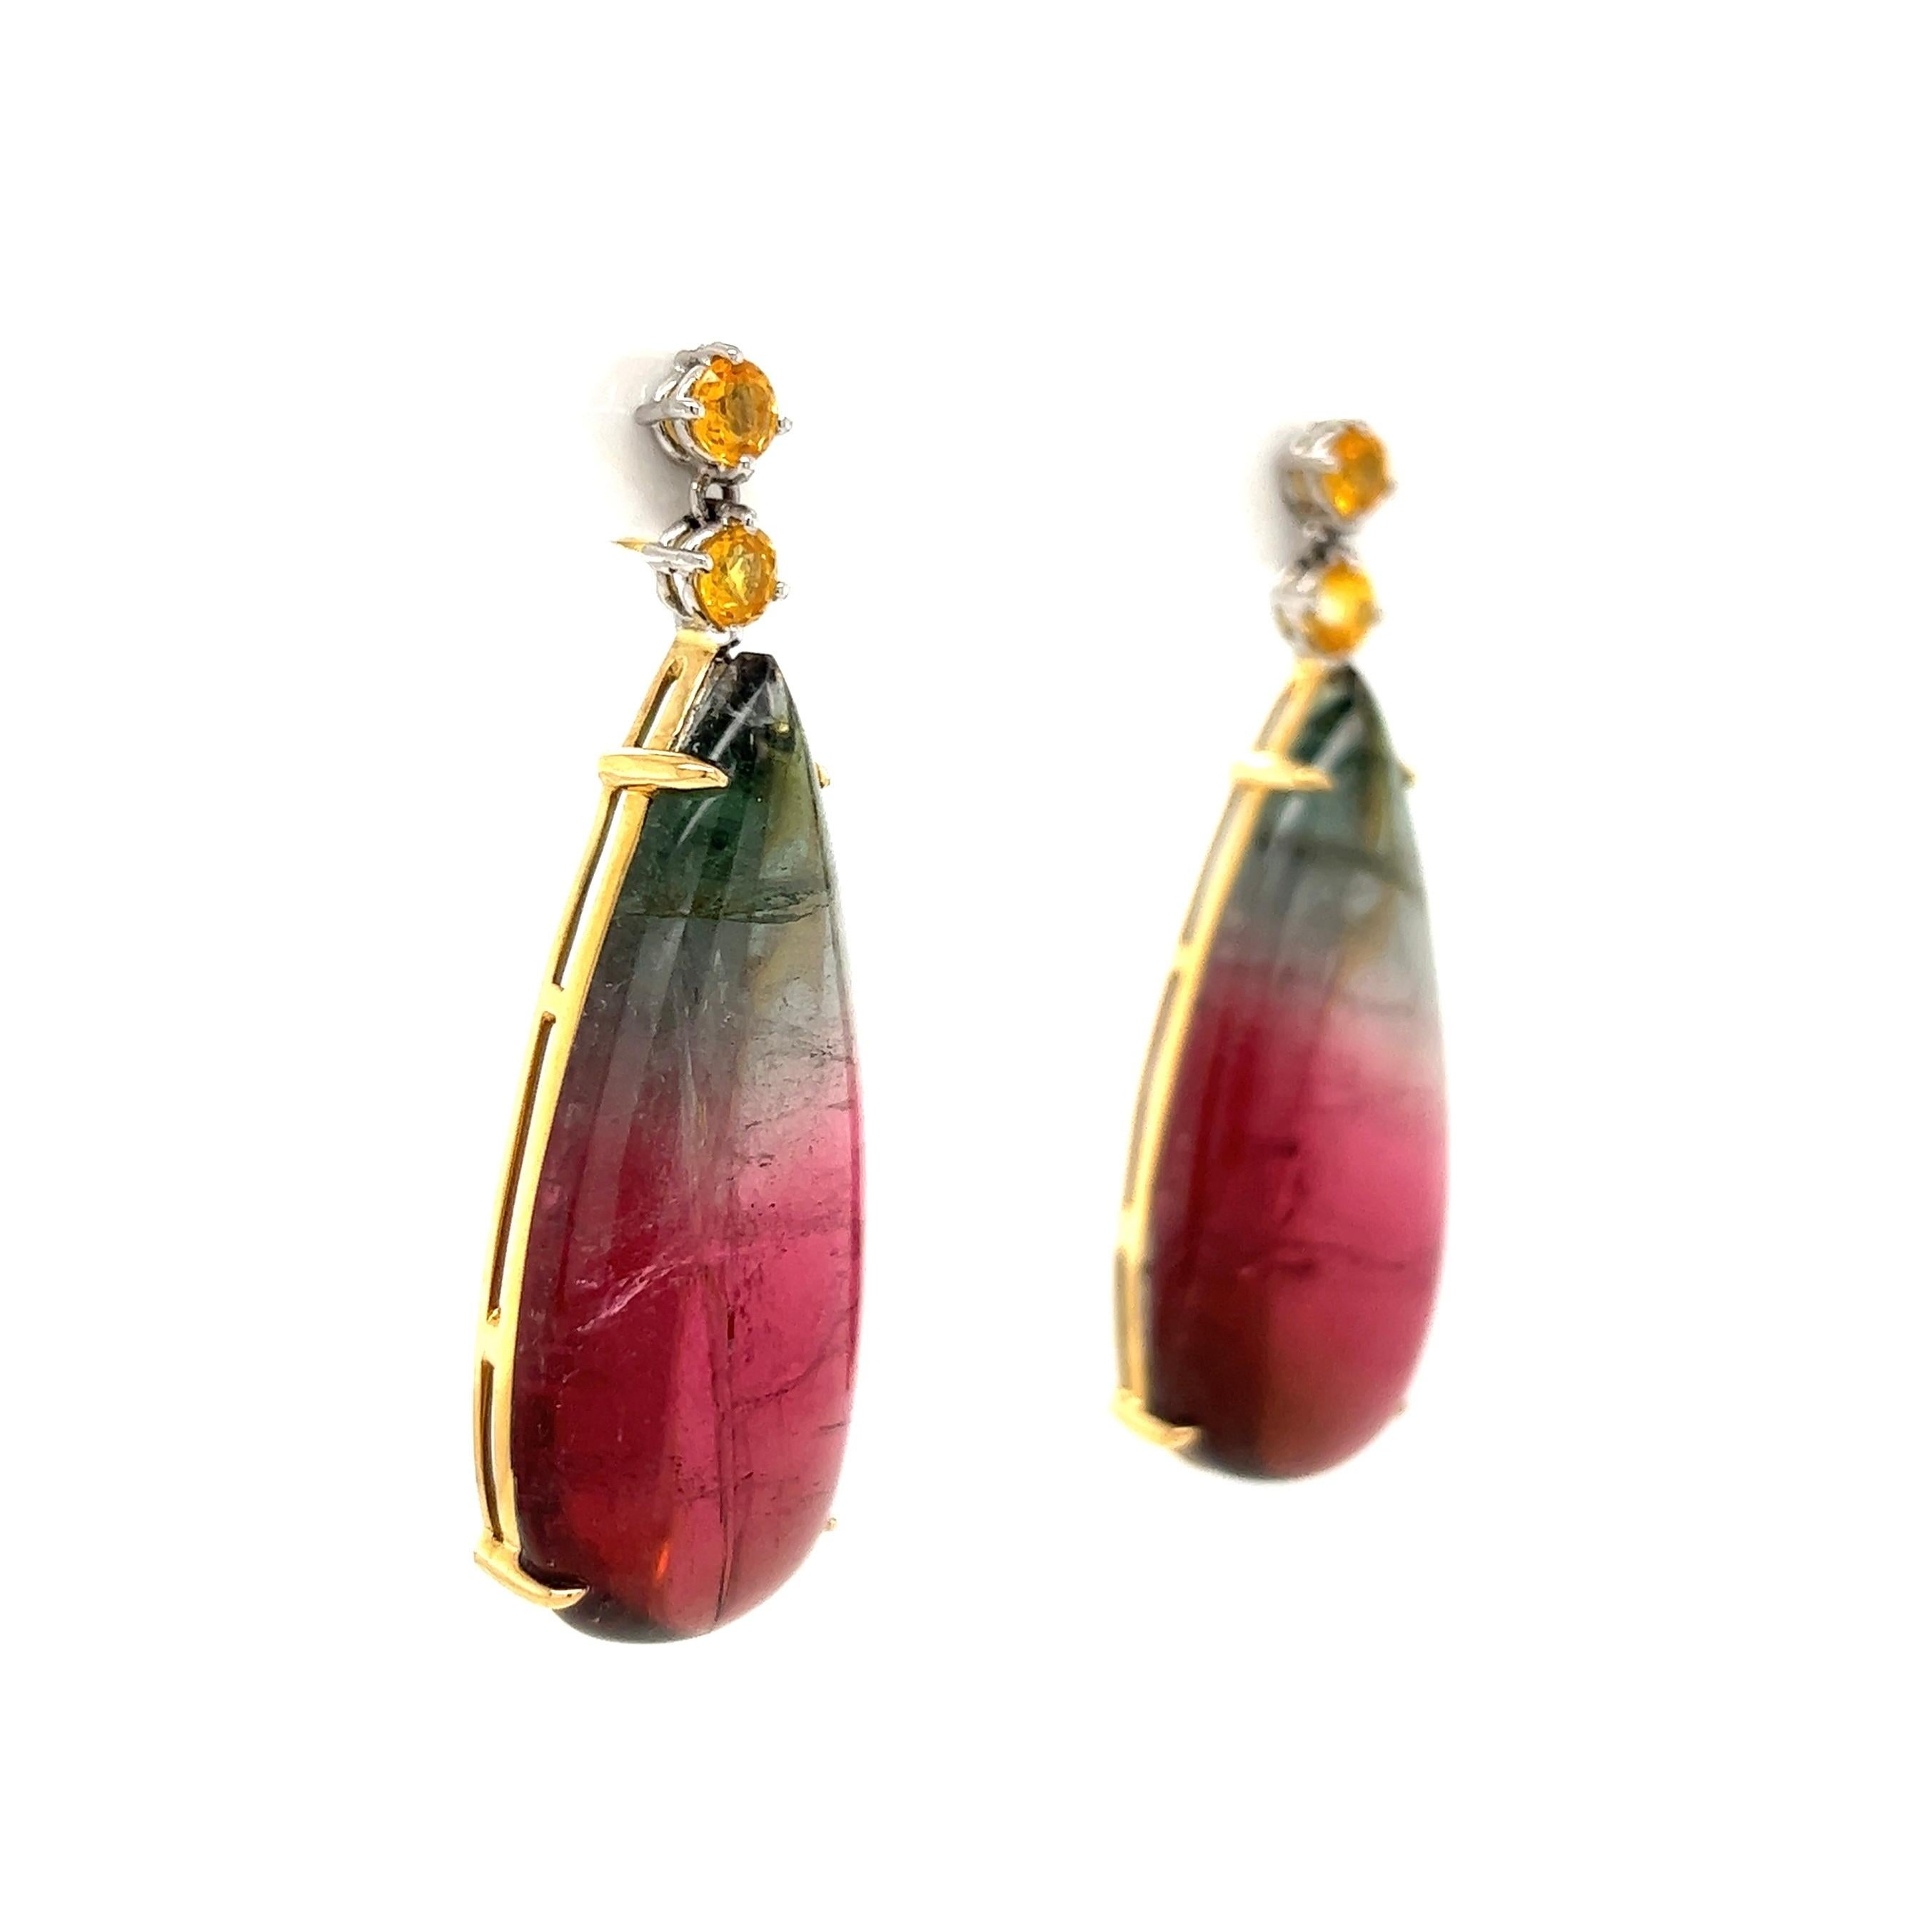 Mixed Cut Bi-Color Tourmaline and Yellow Sapphire Drop Earrings Estate Fine Jewelry For Sale